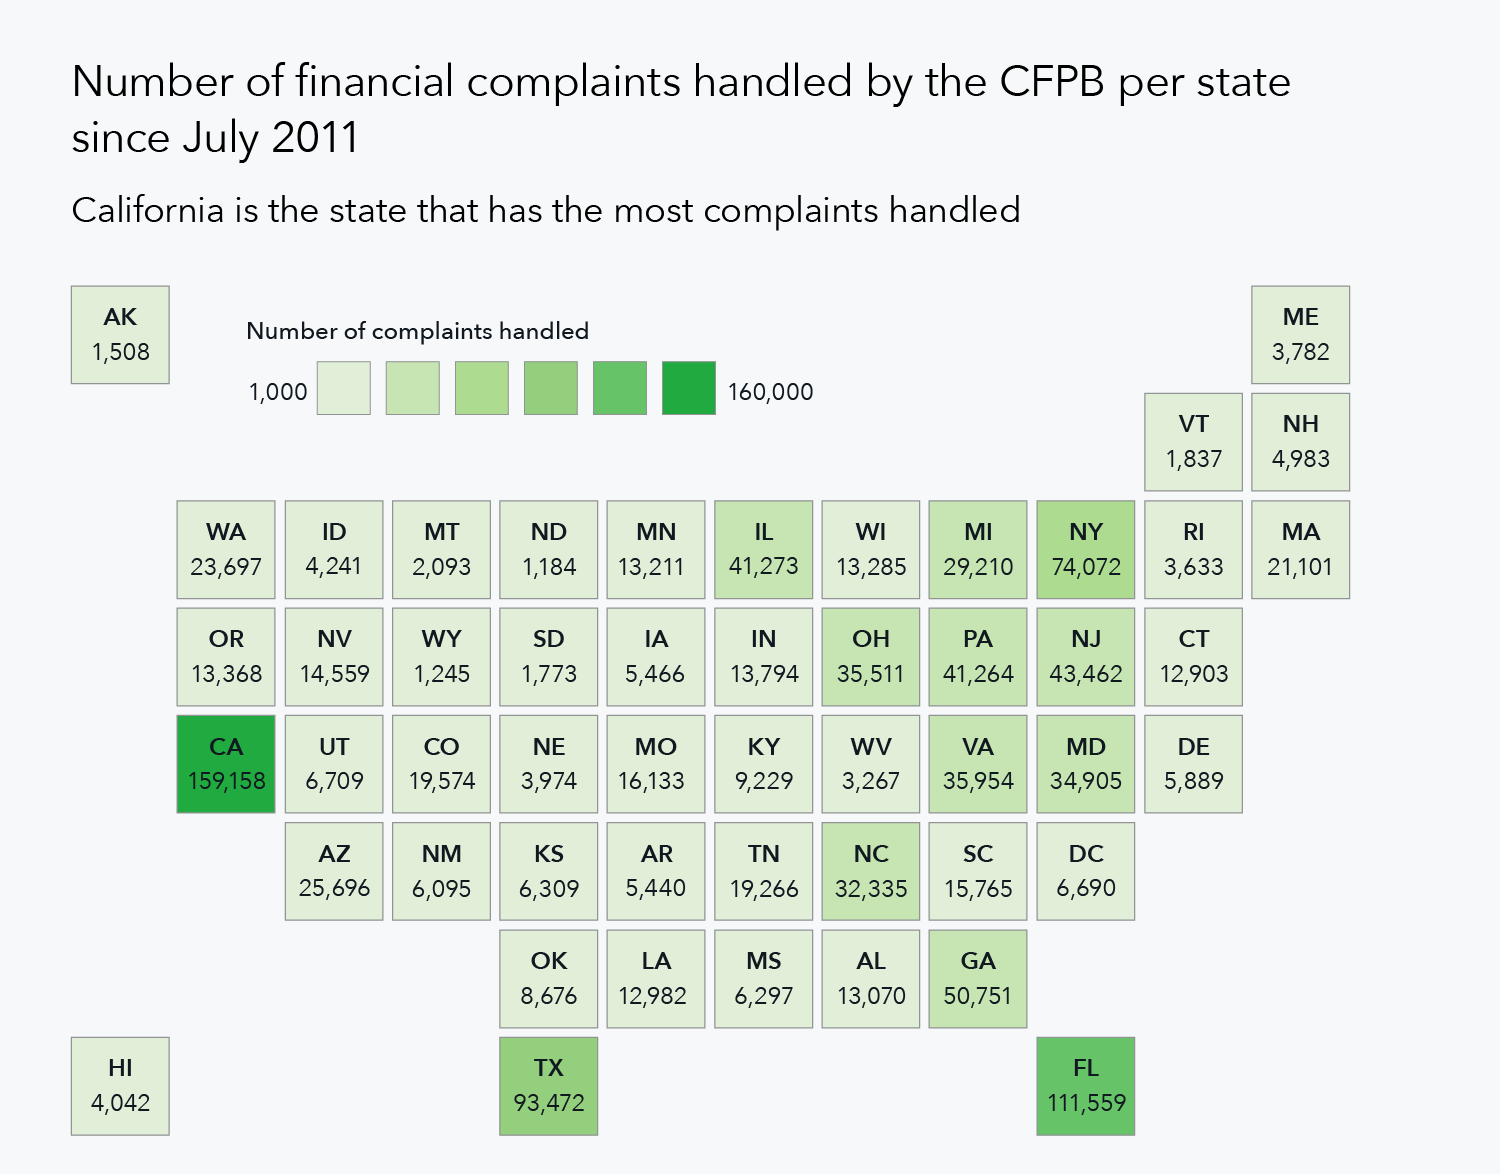 Tile map showing number of financial complaints handled by the CFPB per state since July 2011